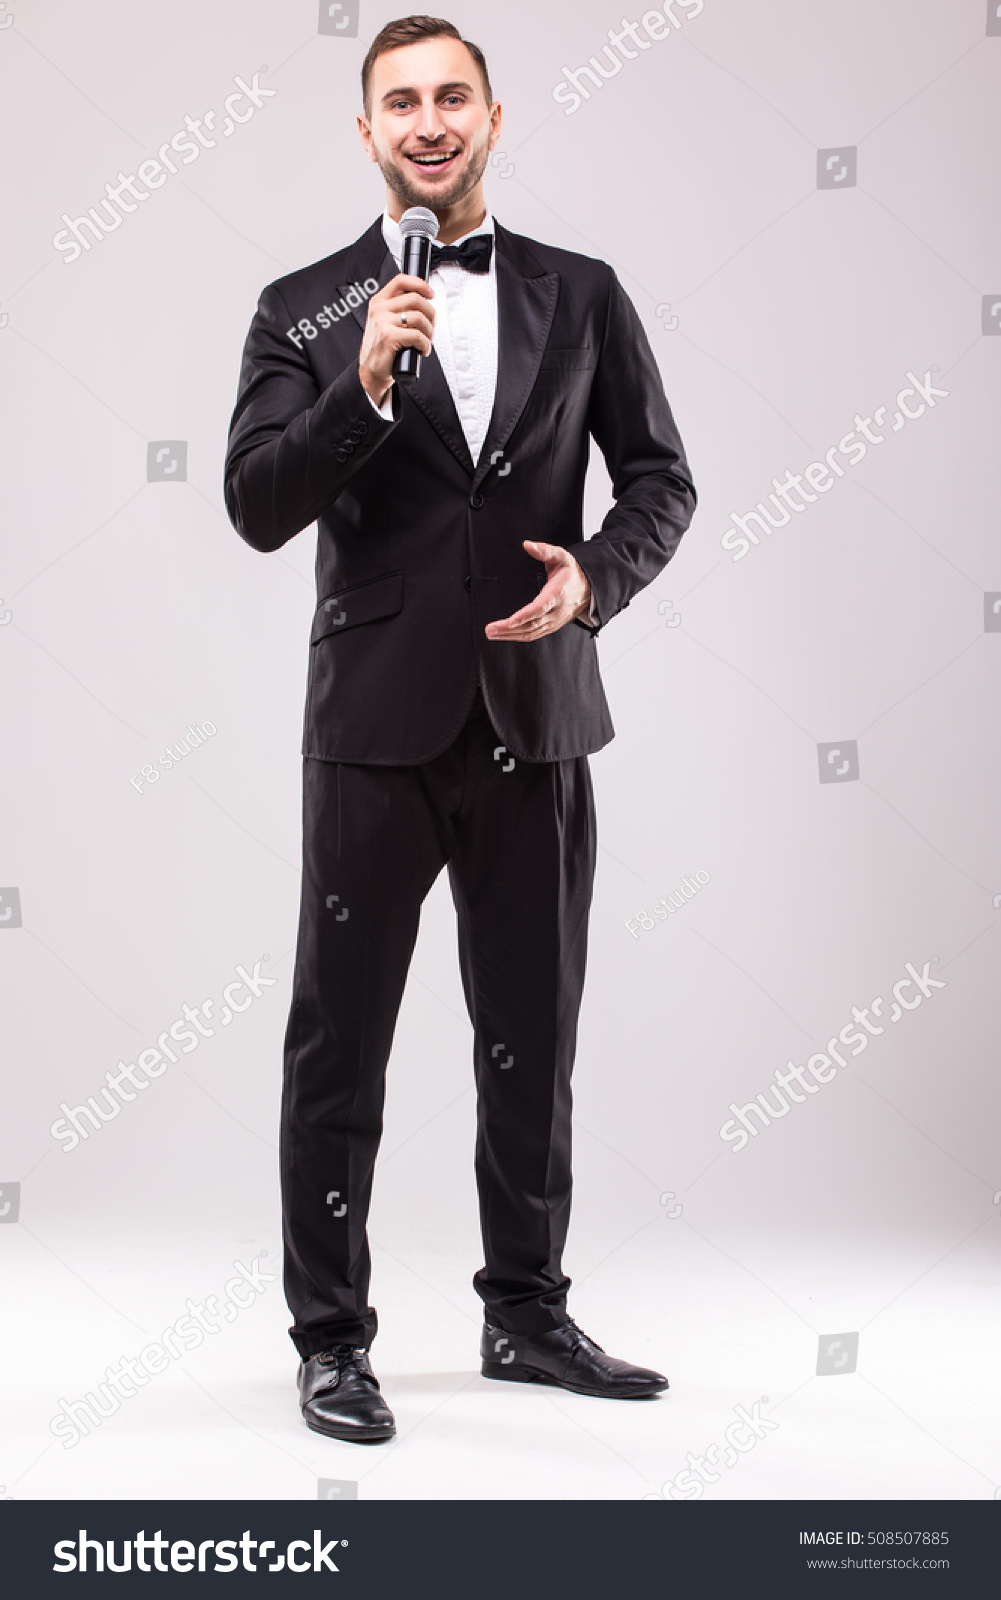 Young Showman presenter with microphone against white background.Showman concept. #508507885